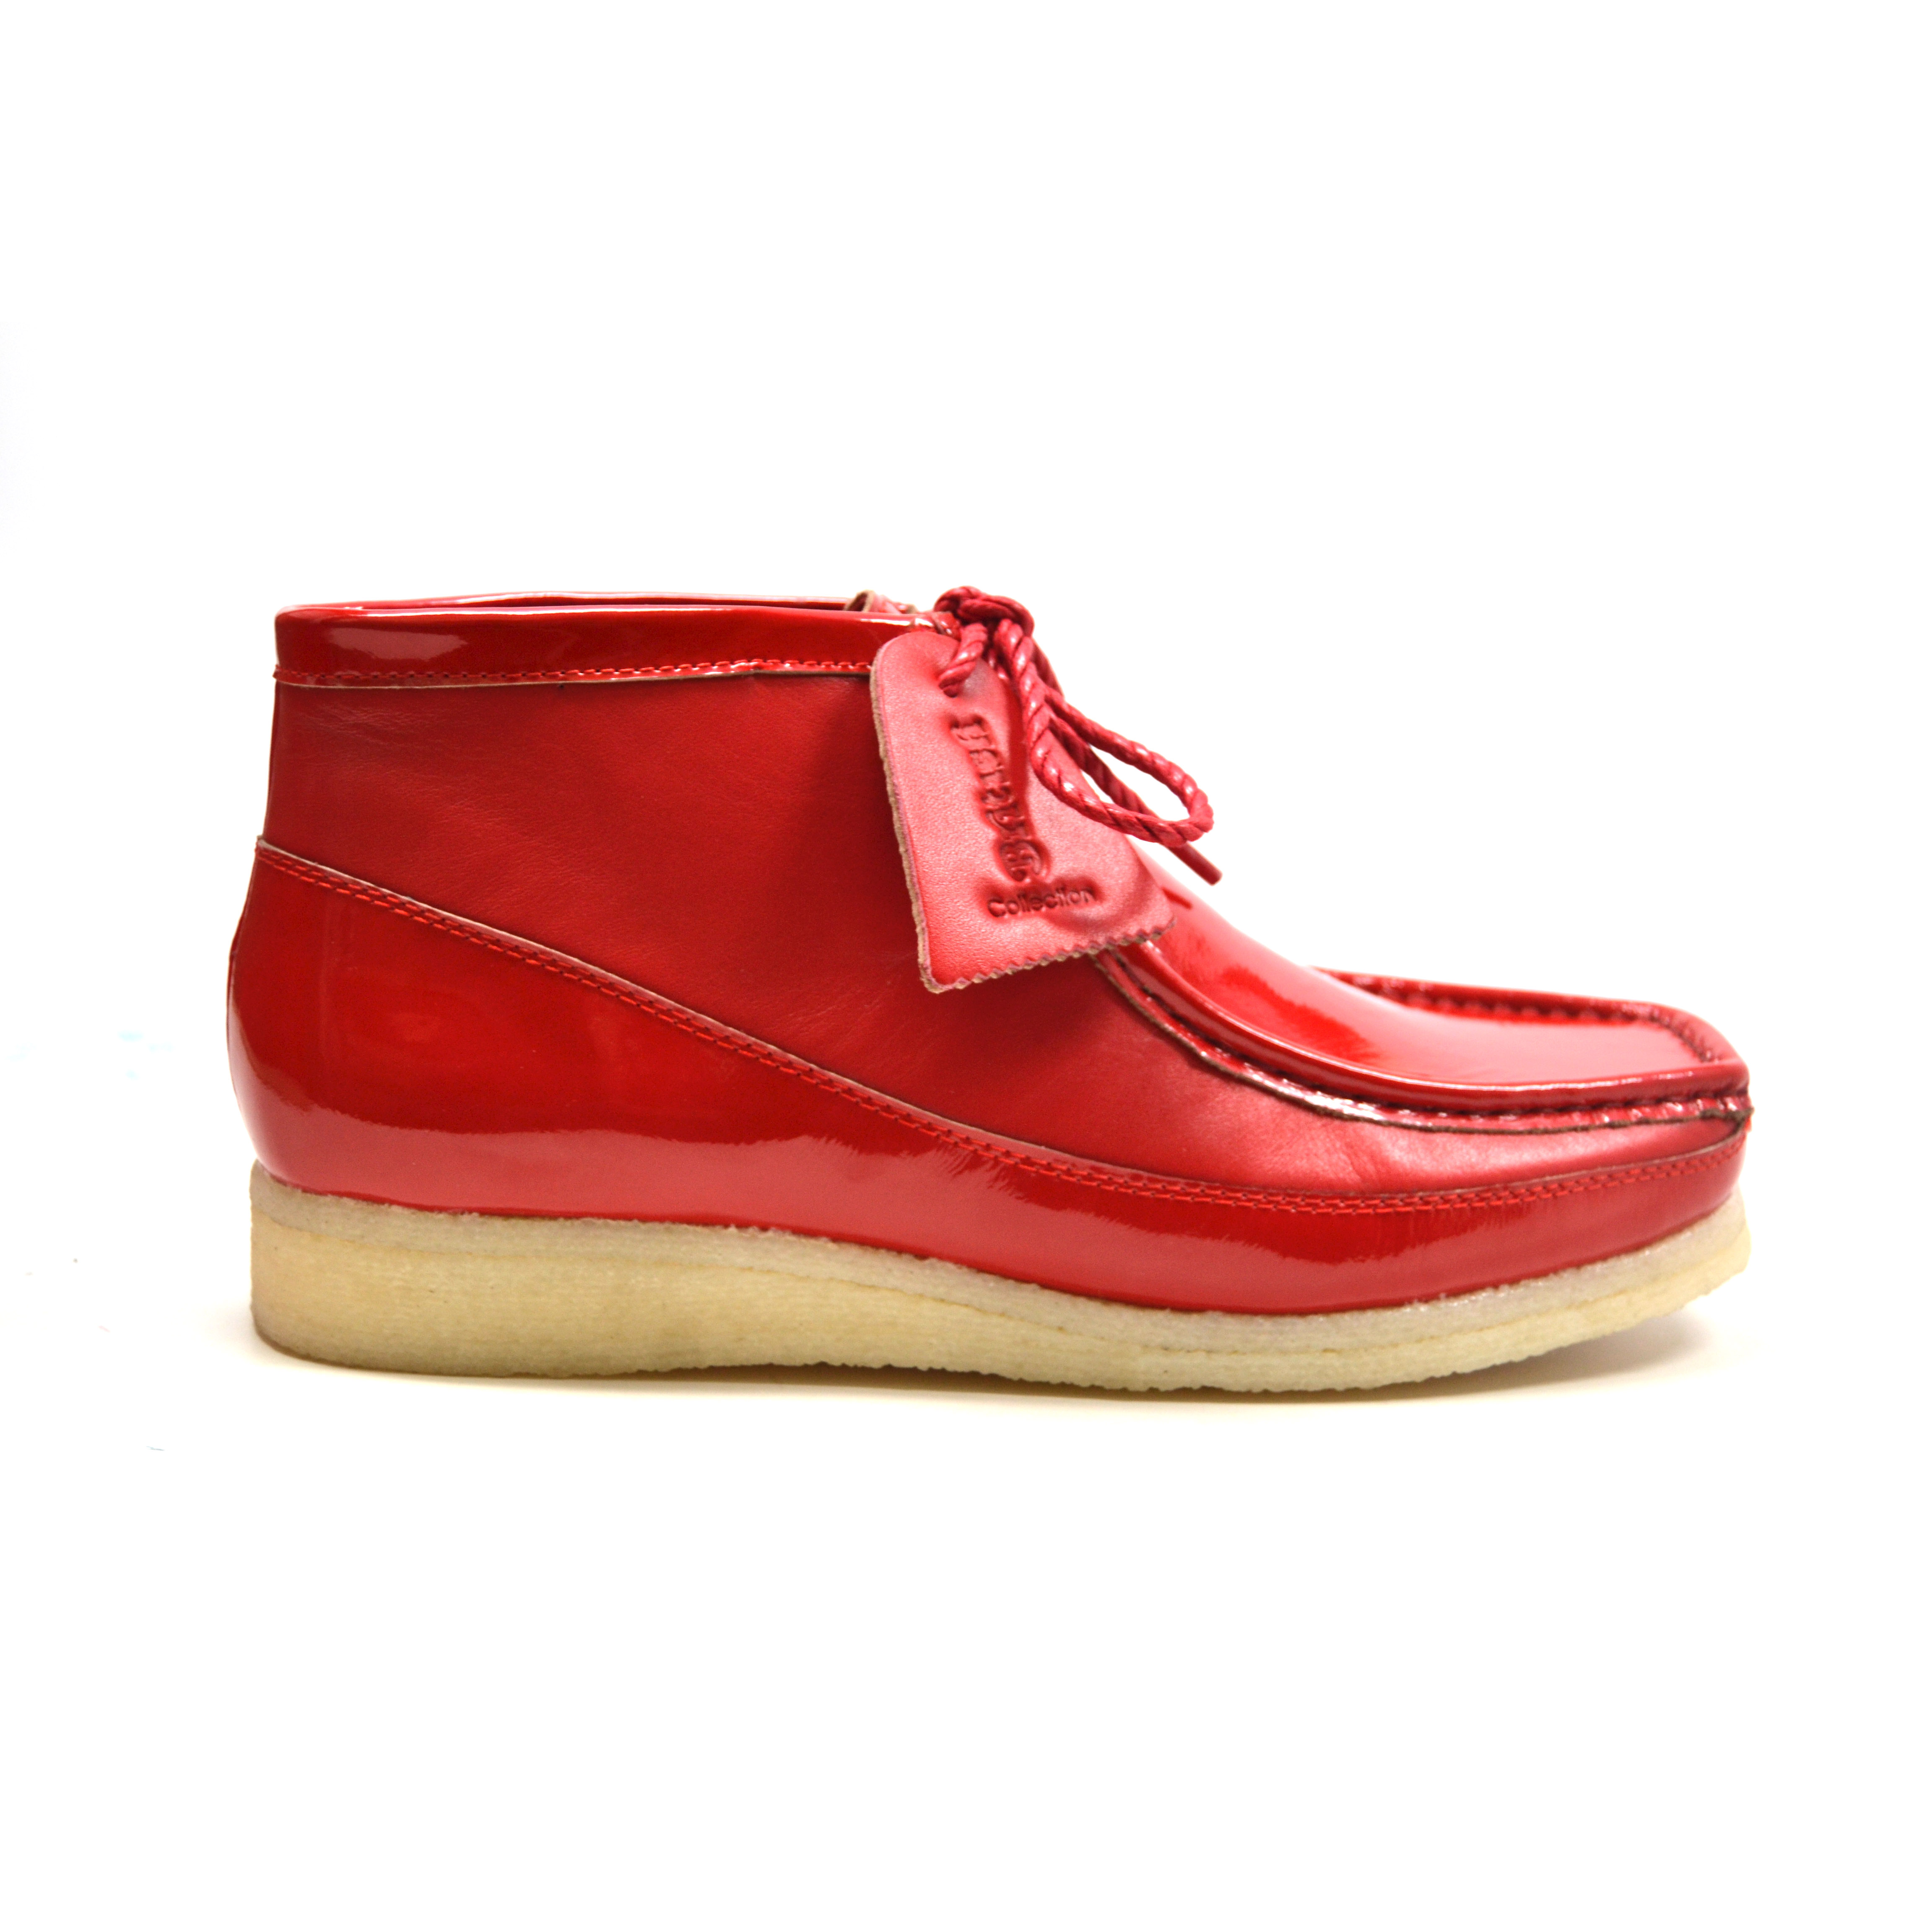 BRITISH WALKERS ORIGINAL EXCLUSIVE TWO TONE RED LEATHER SUEDE RED 